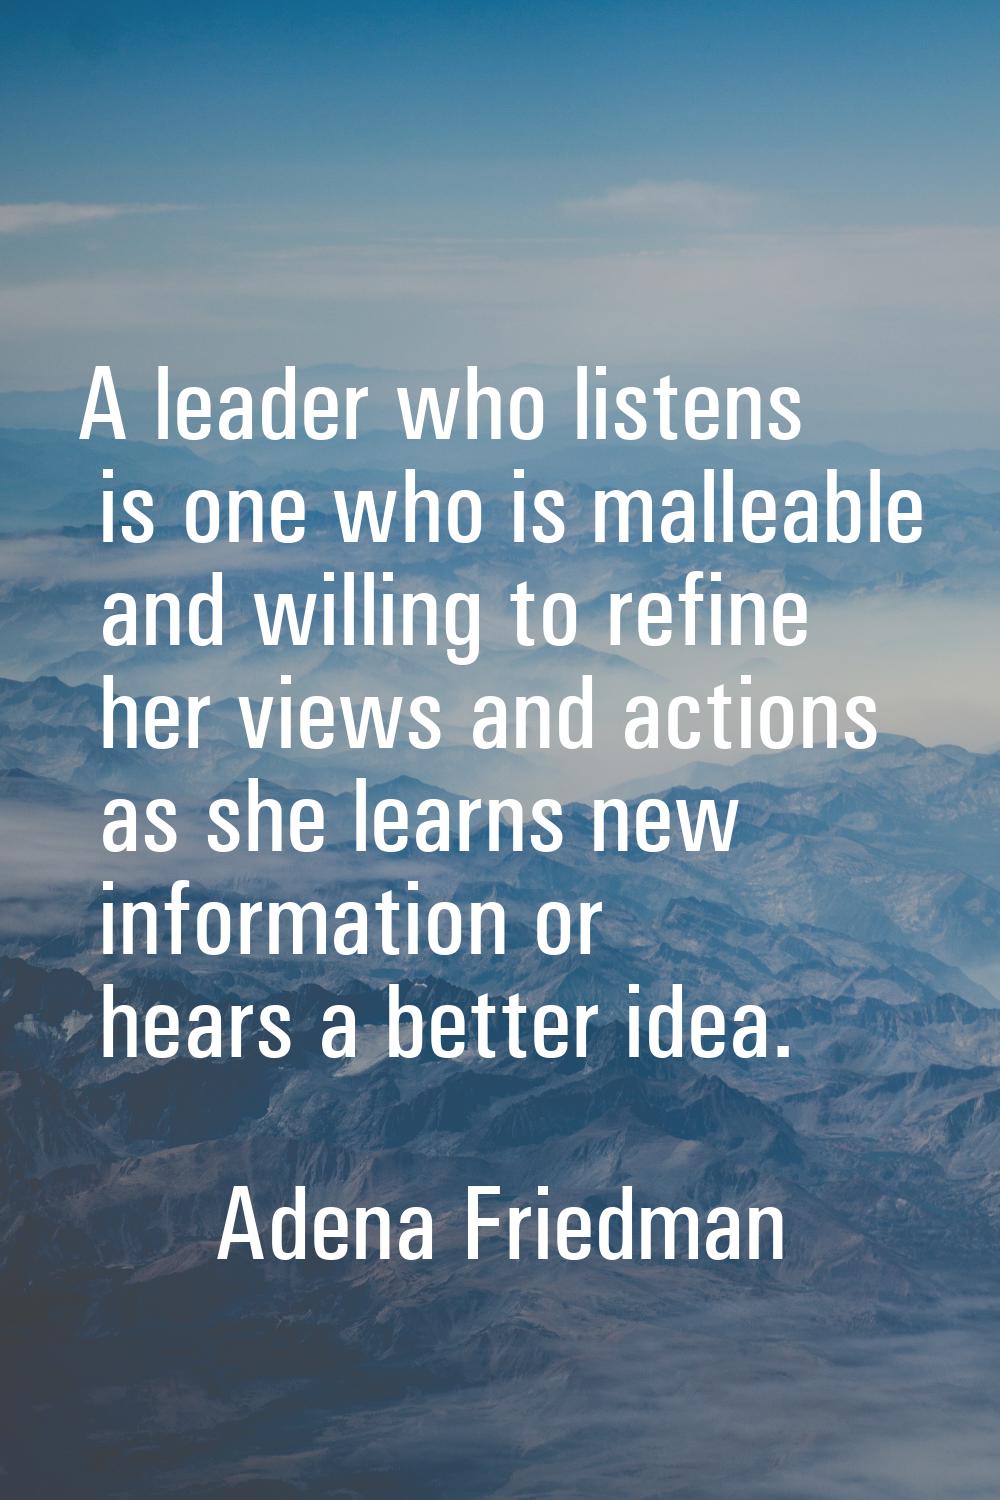 A leader who listens is one who is malleable and willing to refine her views and actions as she lea